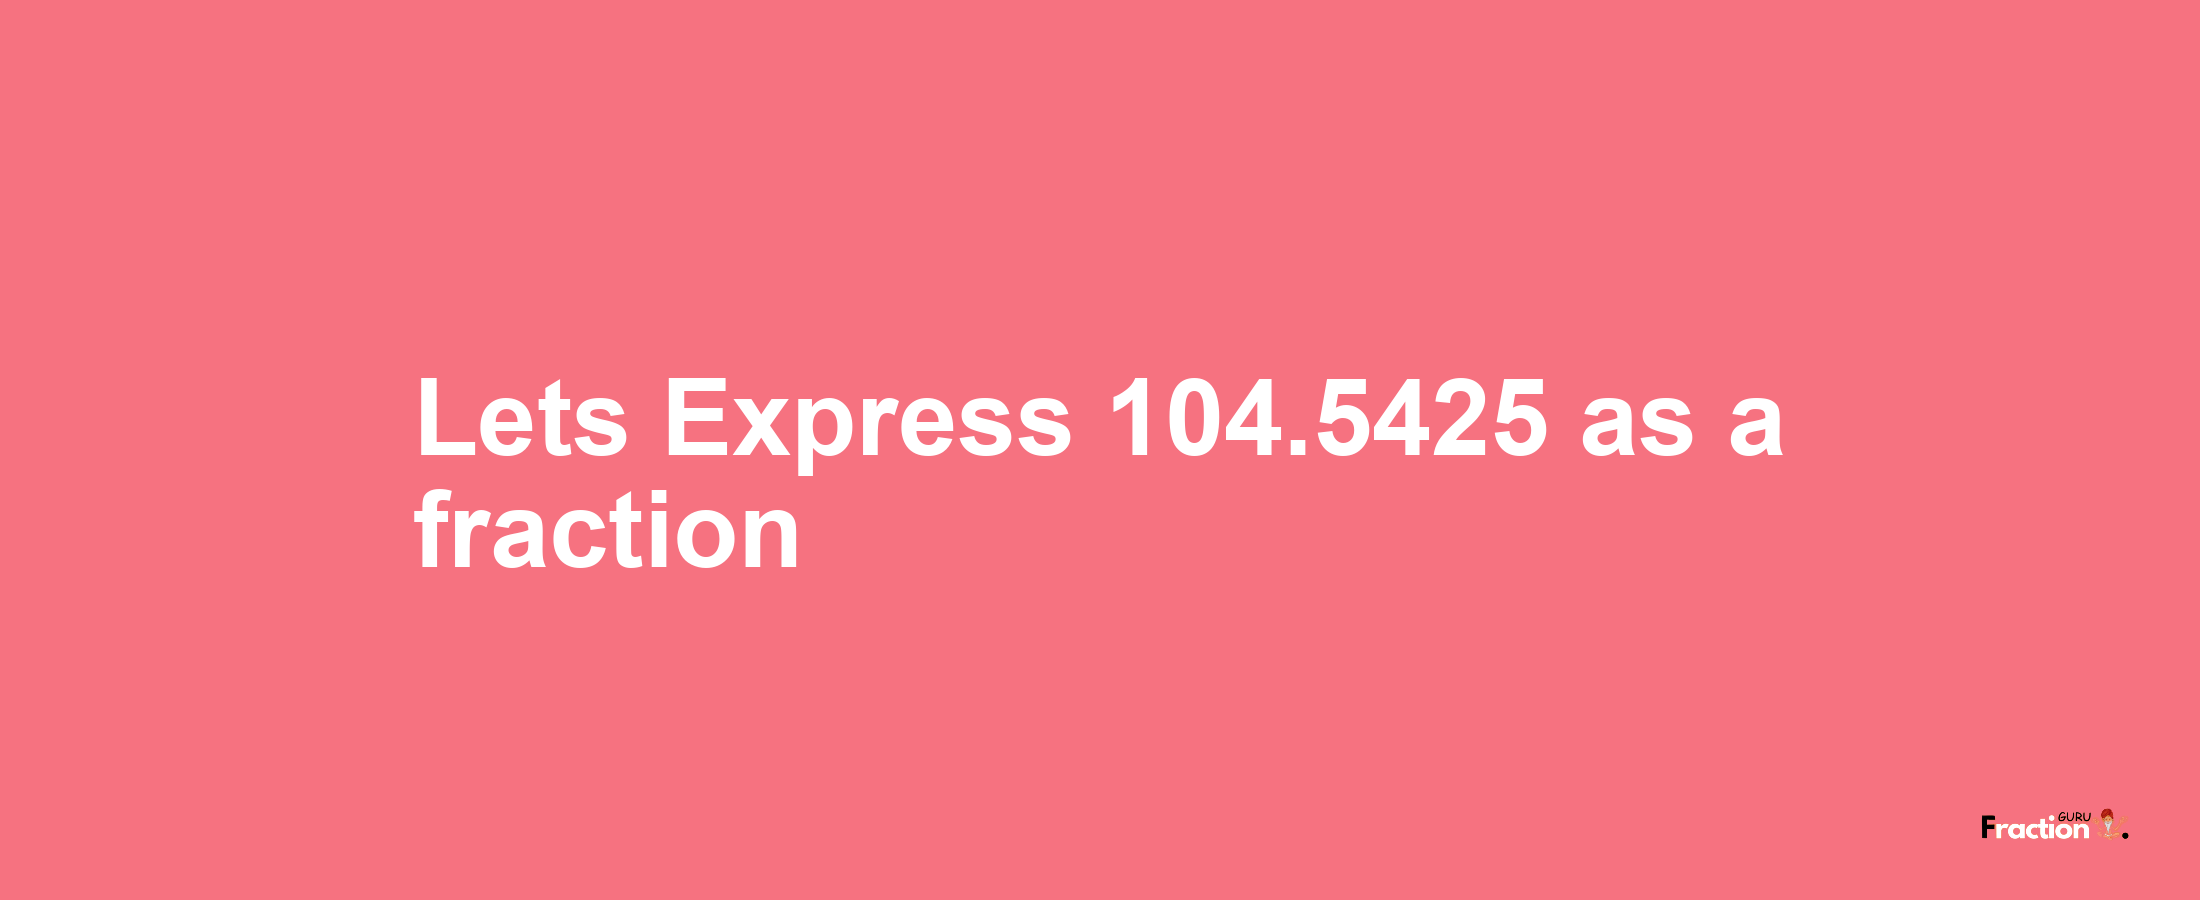 Lets Express 104.5425 as afraction